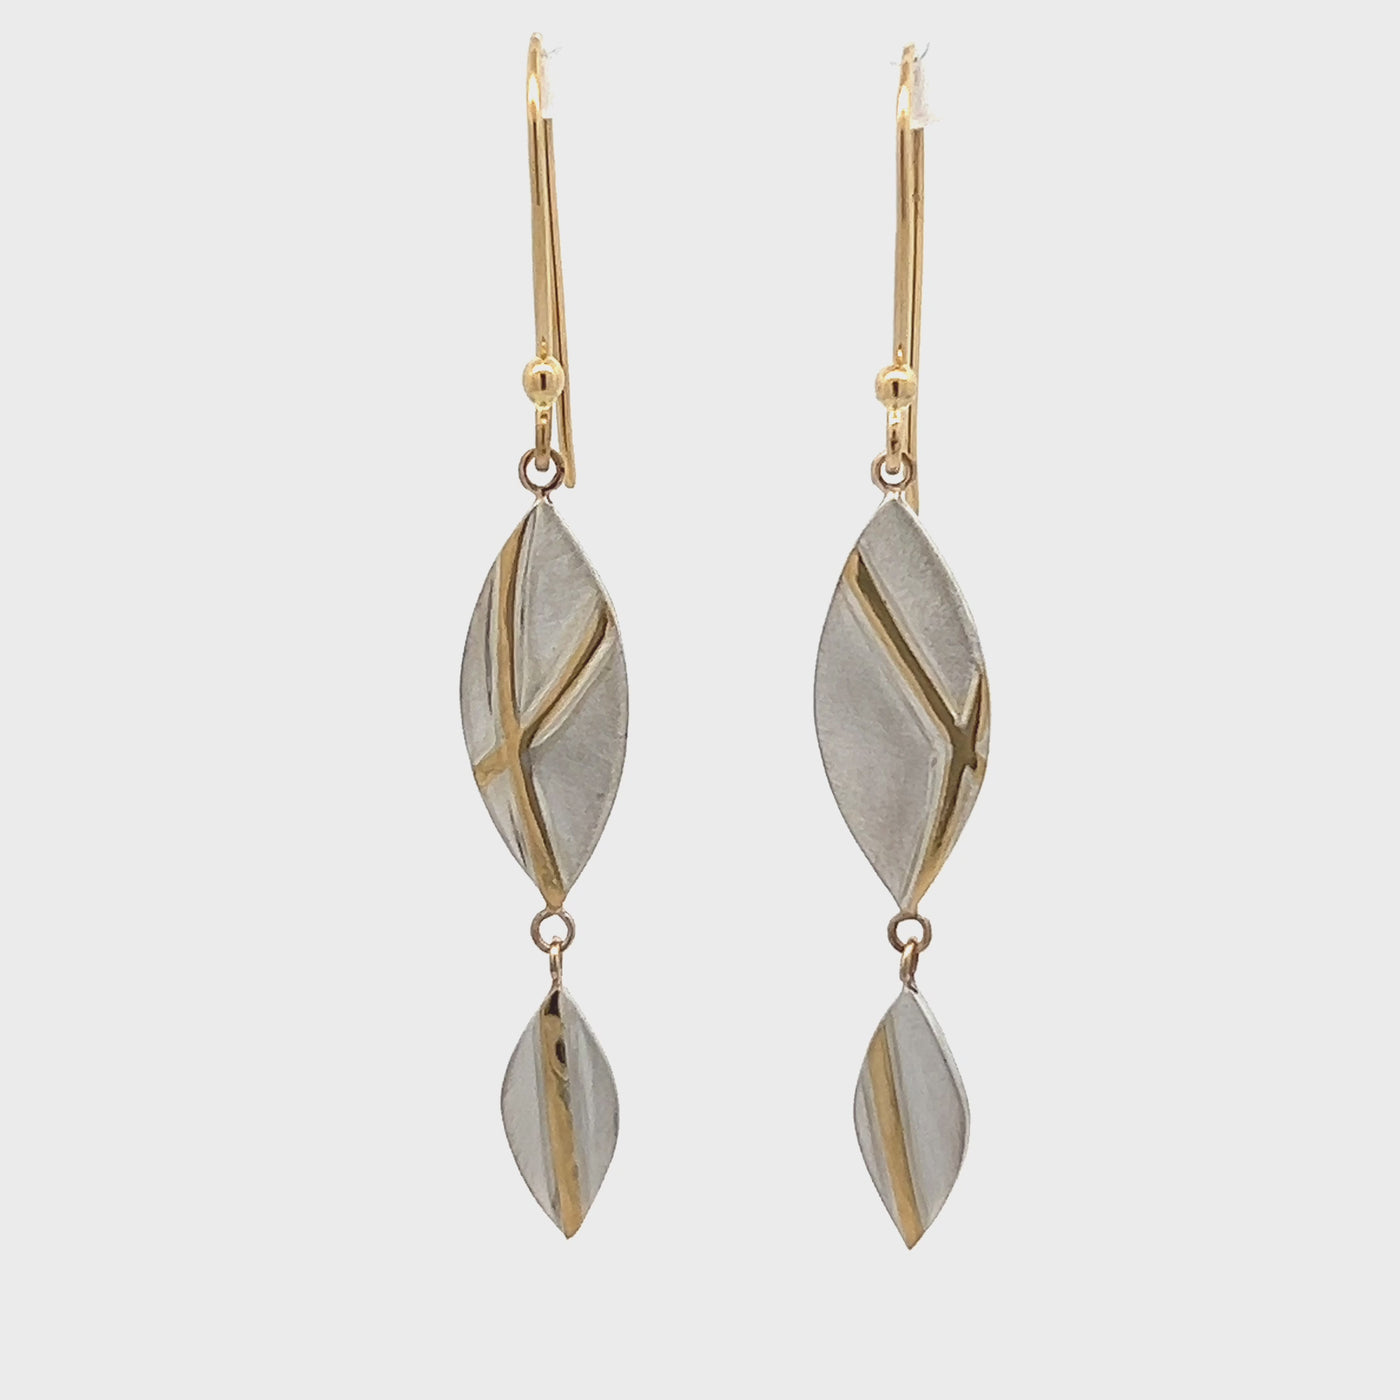 Satin Finished Sterling Silver and 18k Yellow Gold Leaf Earrings by Emily VanDerMaelen